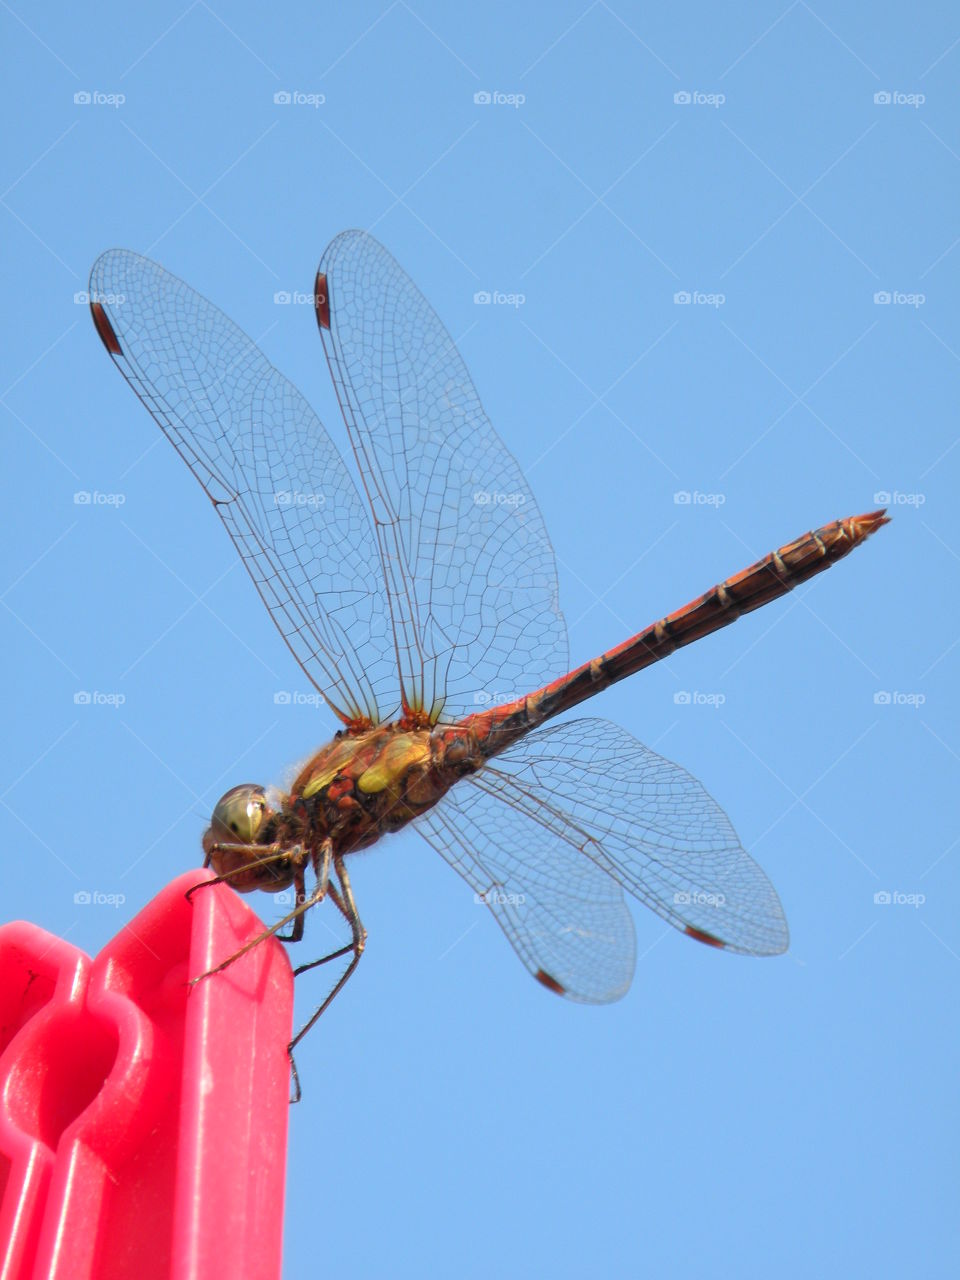 Dragonfly, Insect, Wing, Fly, Nature